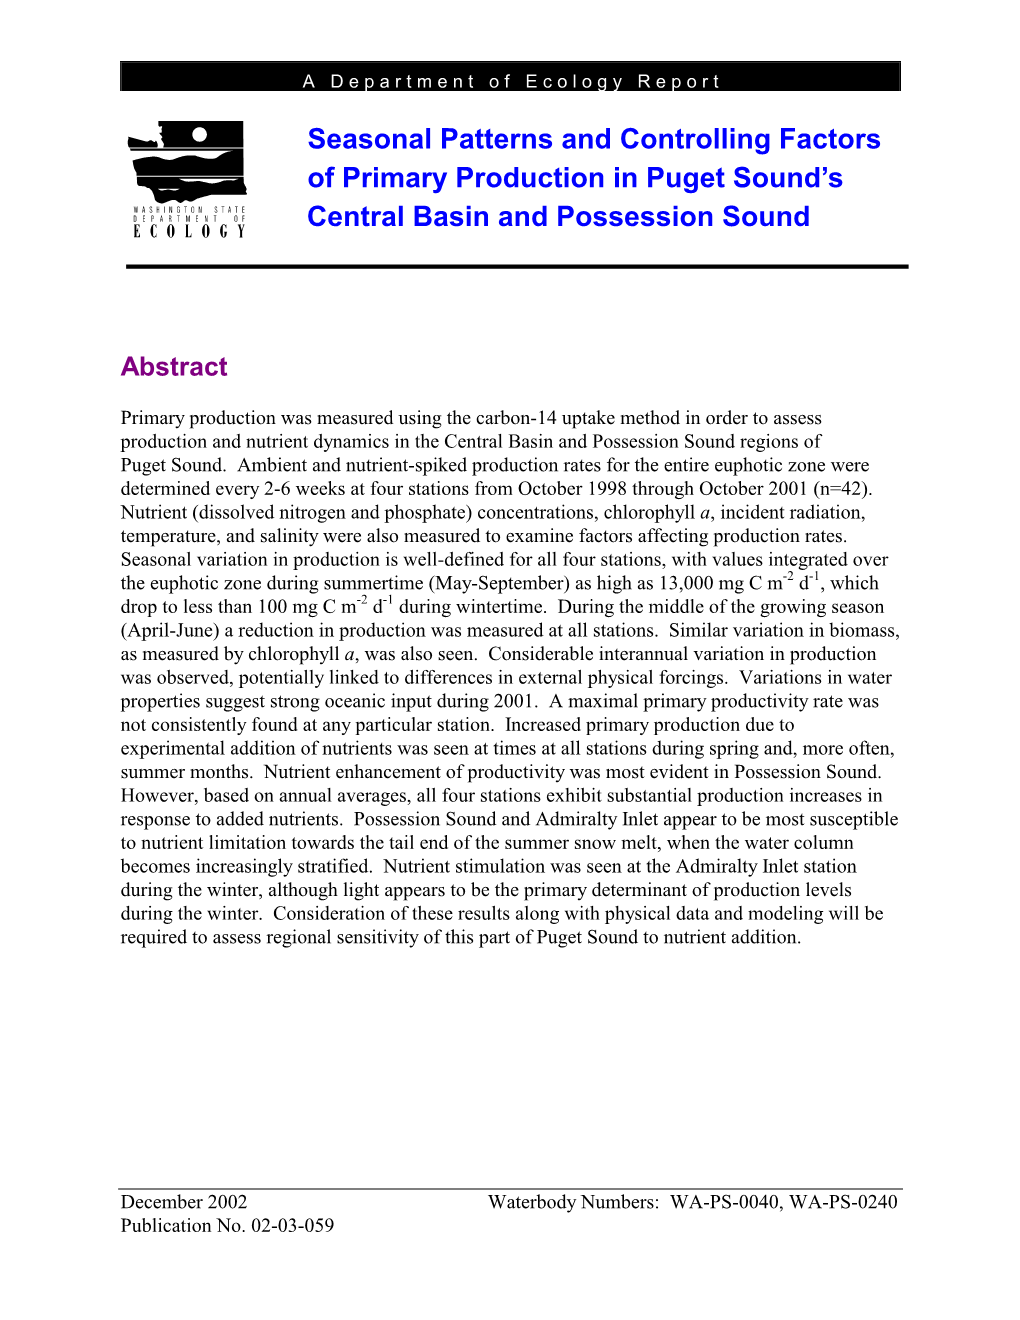 Seasonal Patterns and Controlling Factors of Primary Production in Puget Sound’S Central Basin and Possession Sound